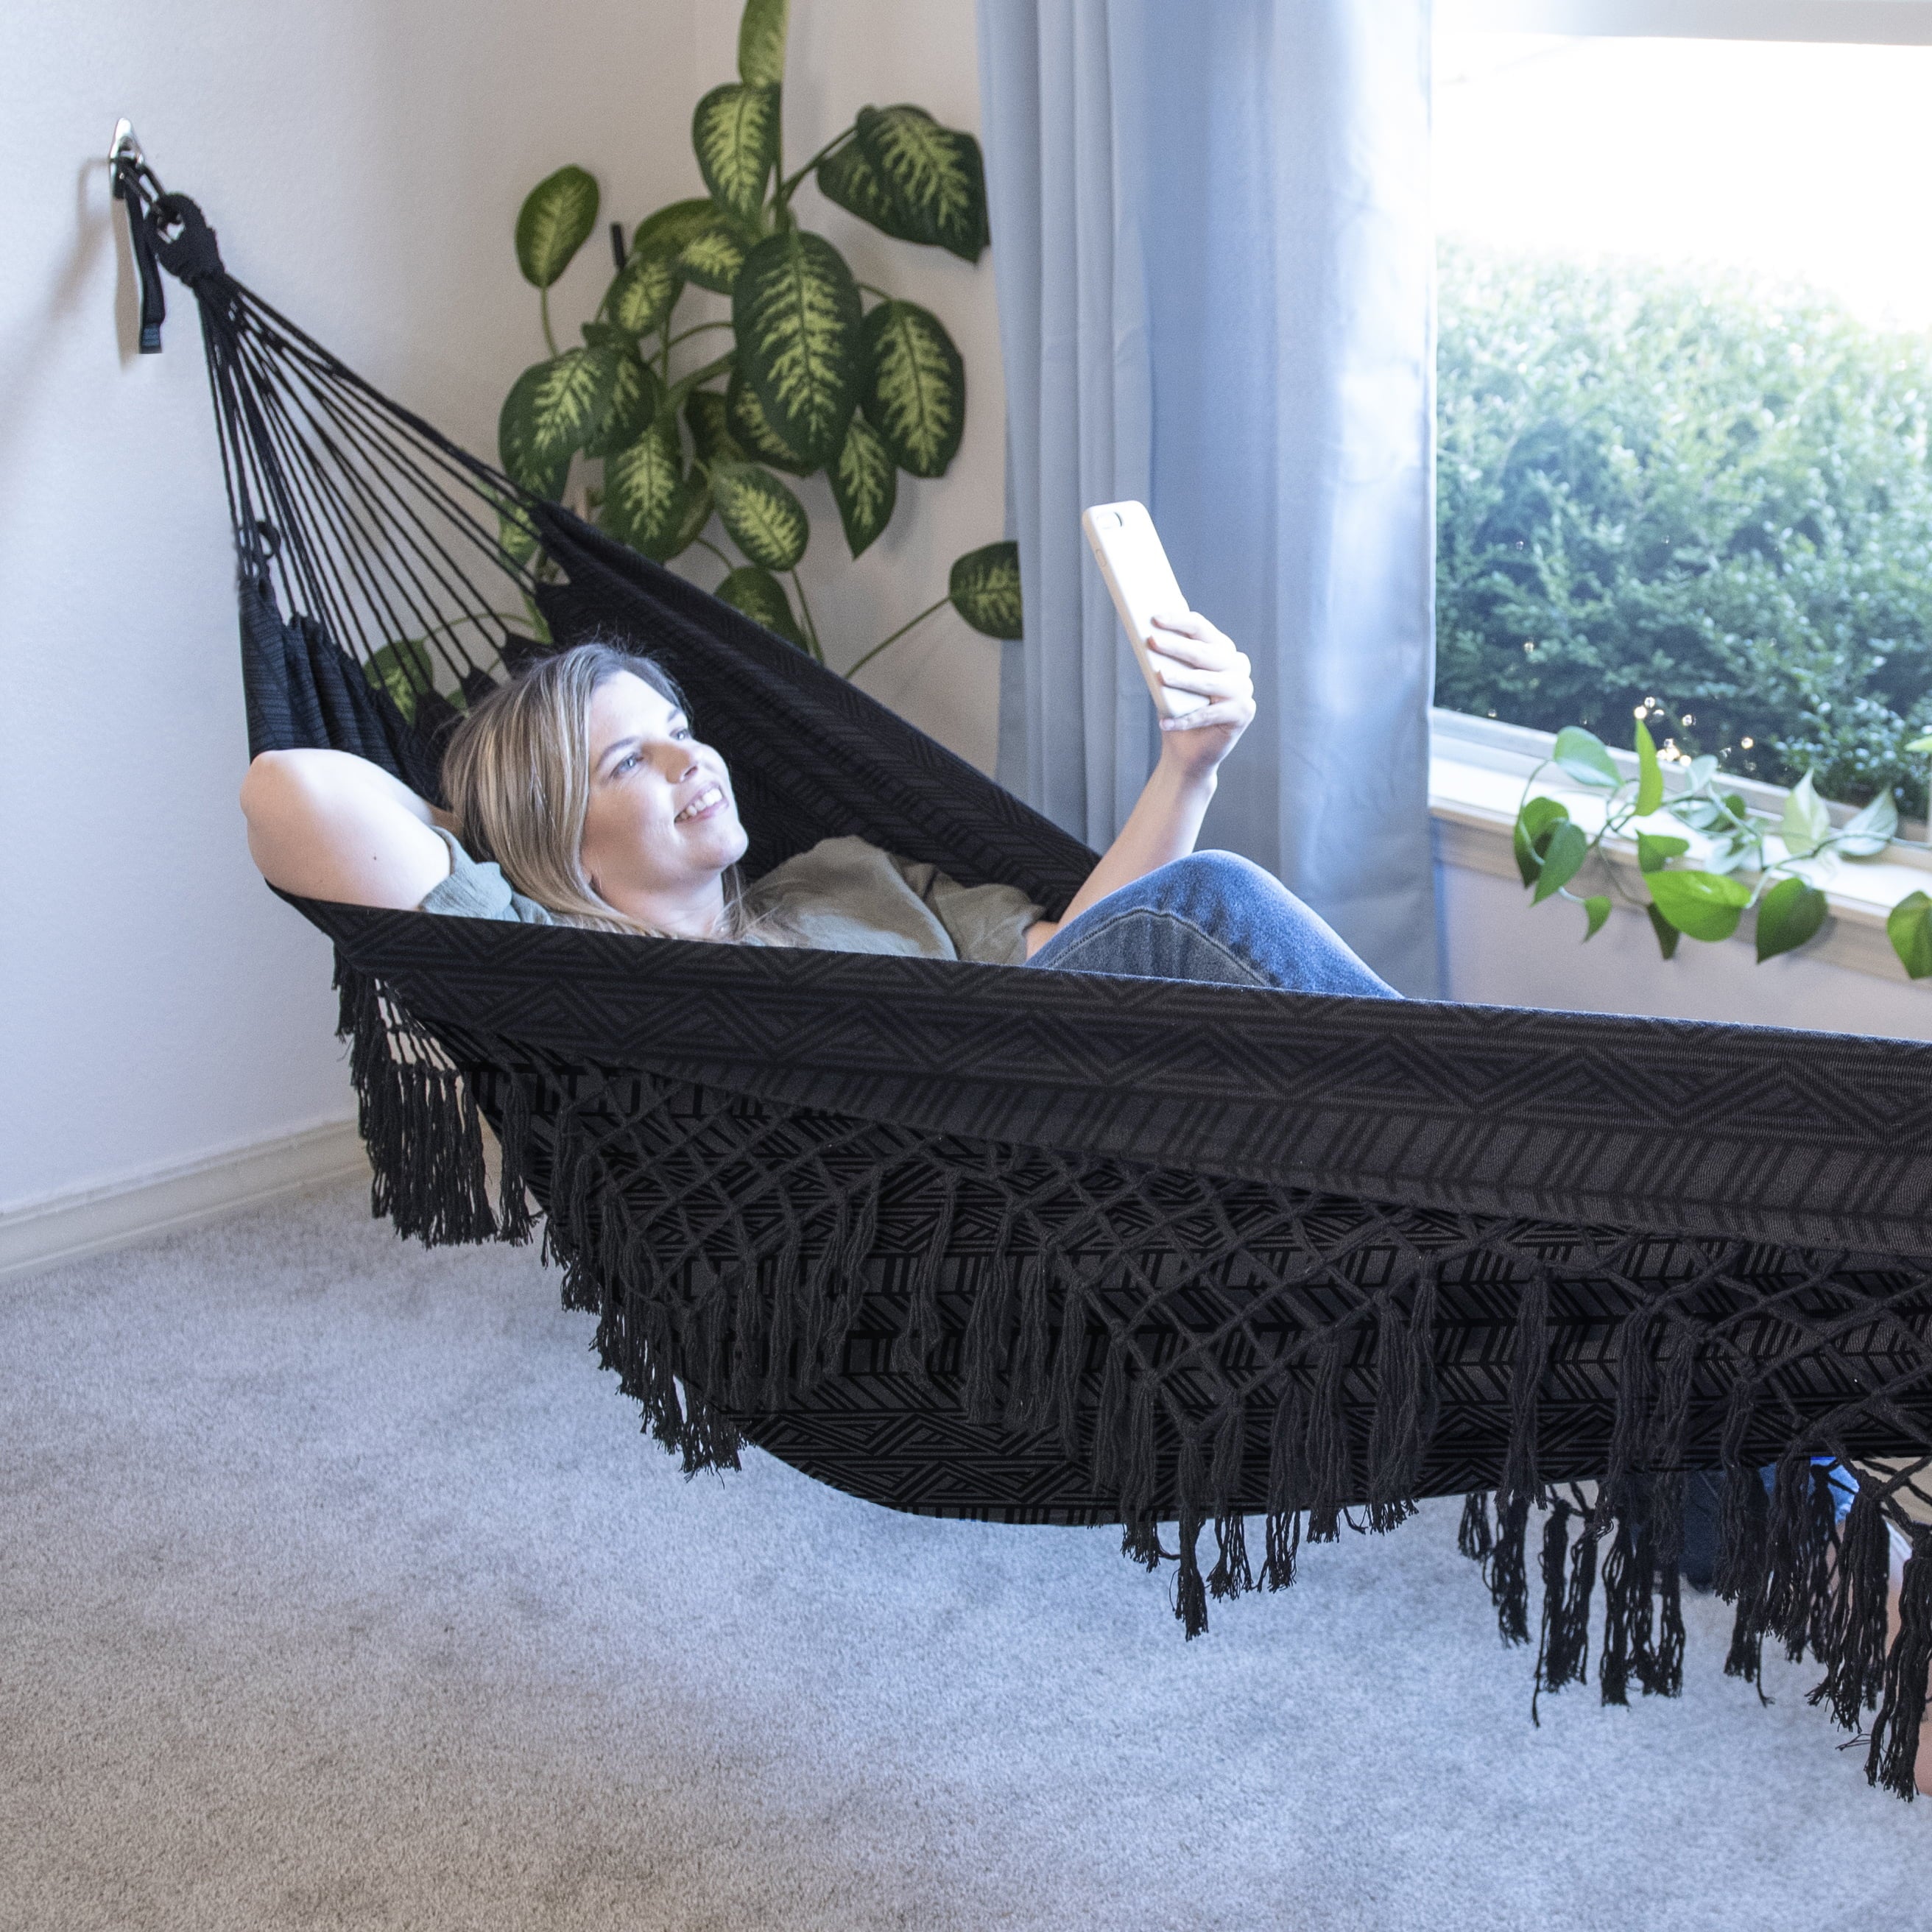 Equip Black Polyester Jacquard Macramé Hammock with Indoor Hanging Kit Bundle, Open Size 81" L x 59" W